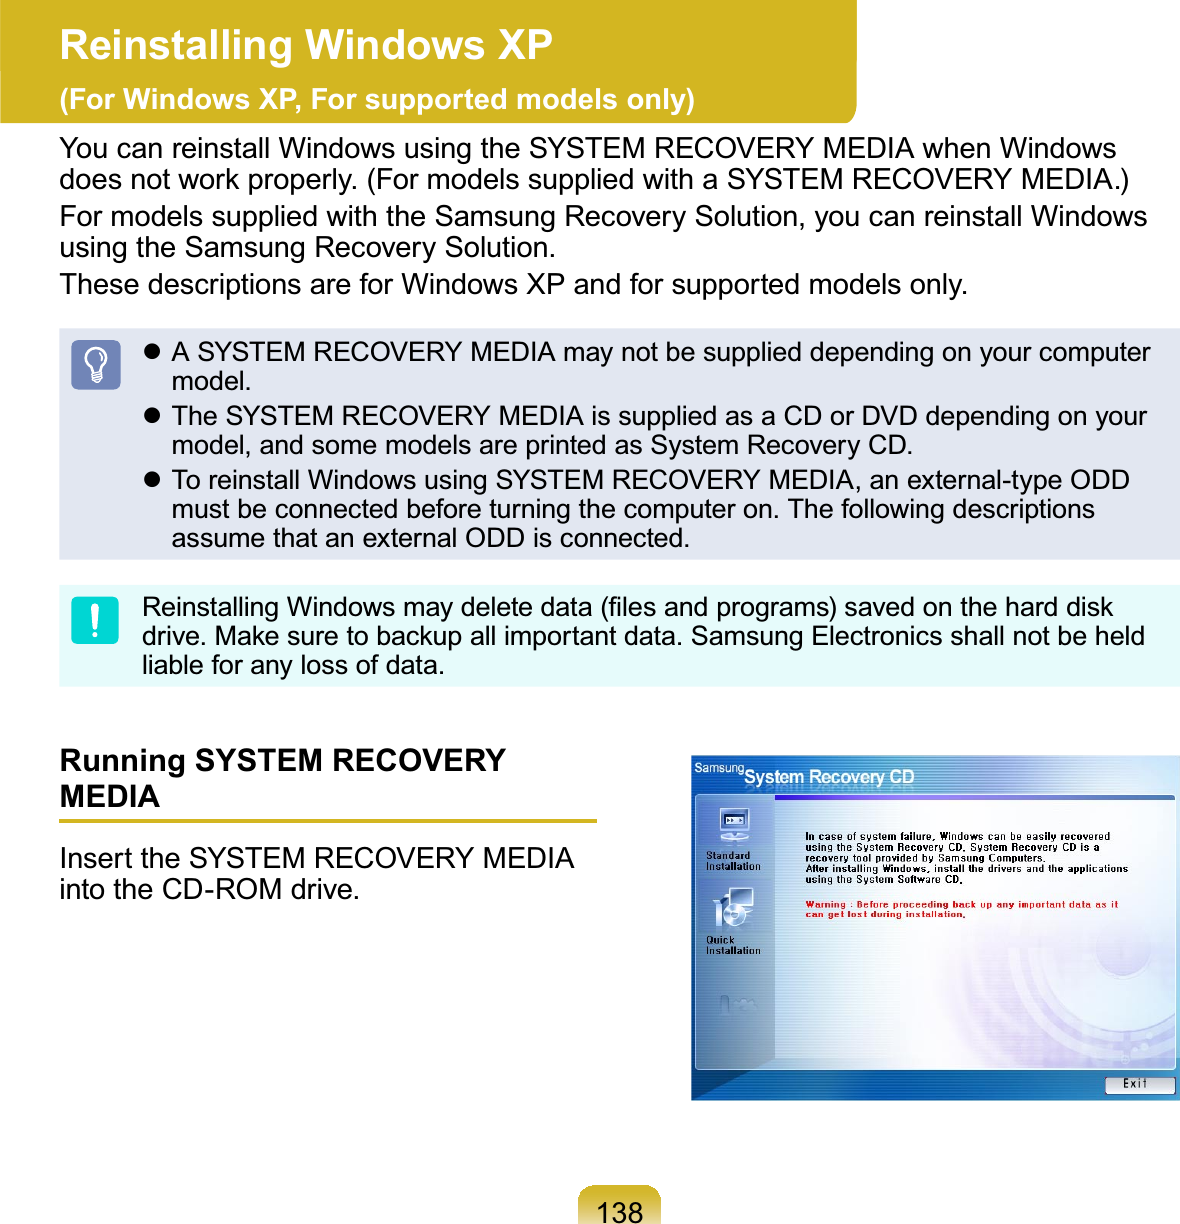 138Reinstalling Windows XP (For Windows XP, For supported models only)You can reinstall Windows using the SYSTEM RECOVERY MEDIA when WindowsGRHVQRWZRUNSURSHUO\)RUPRGHOVVXSSOLHGZLWKD6&lt;67(05(&amp;29(5&lt;0(&apos;,$For models supplied with the Samsung Recovery Solution, you can reinstall WindowsusingtheSamsungRecoverySolution.ThesedescriptionsareforWindowsXPandforsupportedmodelsonly.z ASYSTEMRECOVERYMEDIAmaynotbesupplieddependingonyourcomputermodel.z TheSYSTEMRECOVERYMEDIAissuppliedasaCDorDVDdependingonyourmodel,andsomemodelsareprintedasSystemRecoveryCD.z To reinstall Windows using SYSTEM RECOVERY MEDIA, an external-type ODDmust be connected before turning the computer on. The following descriptionsassume that an external ODD is connected.5HLQVWDOOLQJ:LQGRZVPD\GHOHWHGDWD¿OHVDQGSURJUDPVVDYHGRQWKHKDUGGLVNGULYH0DNHVXUHWREDFNXSDOOLPSRUWDQWGDWD6DPVXQJ(OHFWURQLFVVKDOOQRWEHKHOGliable for any loss of data.Running SYSTEM RECOVERY MEDIAInserttheSYSTEMRECOVERYMEDIAintotheCD-ROMdrive.